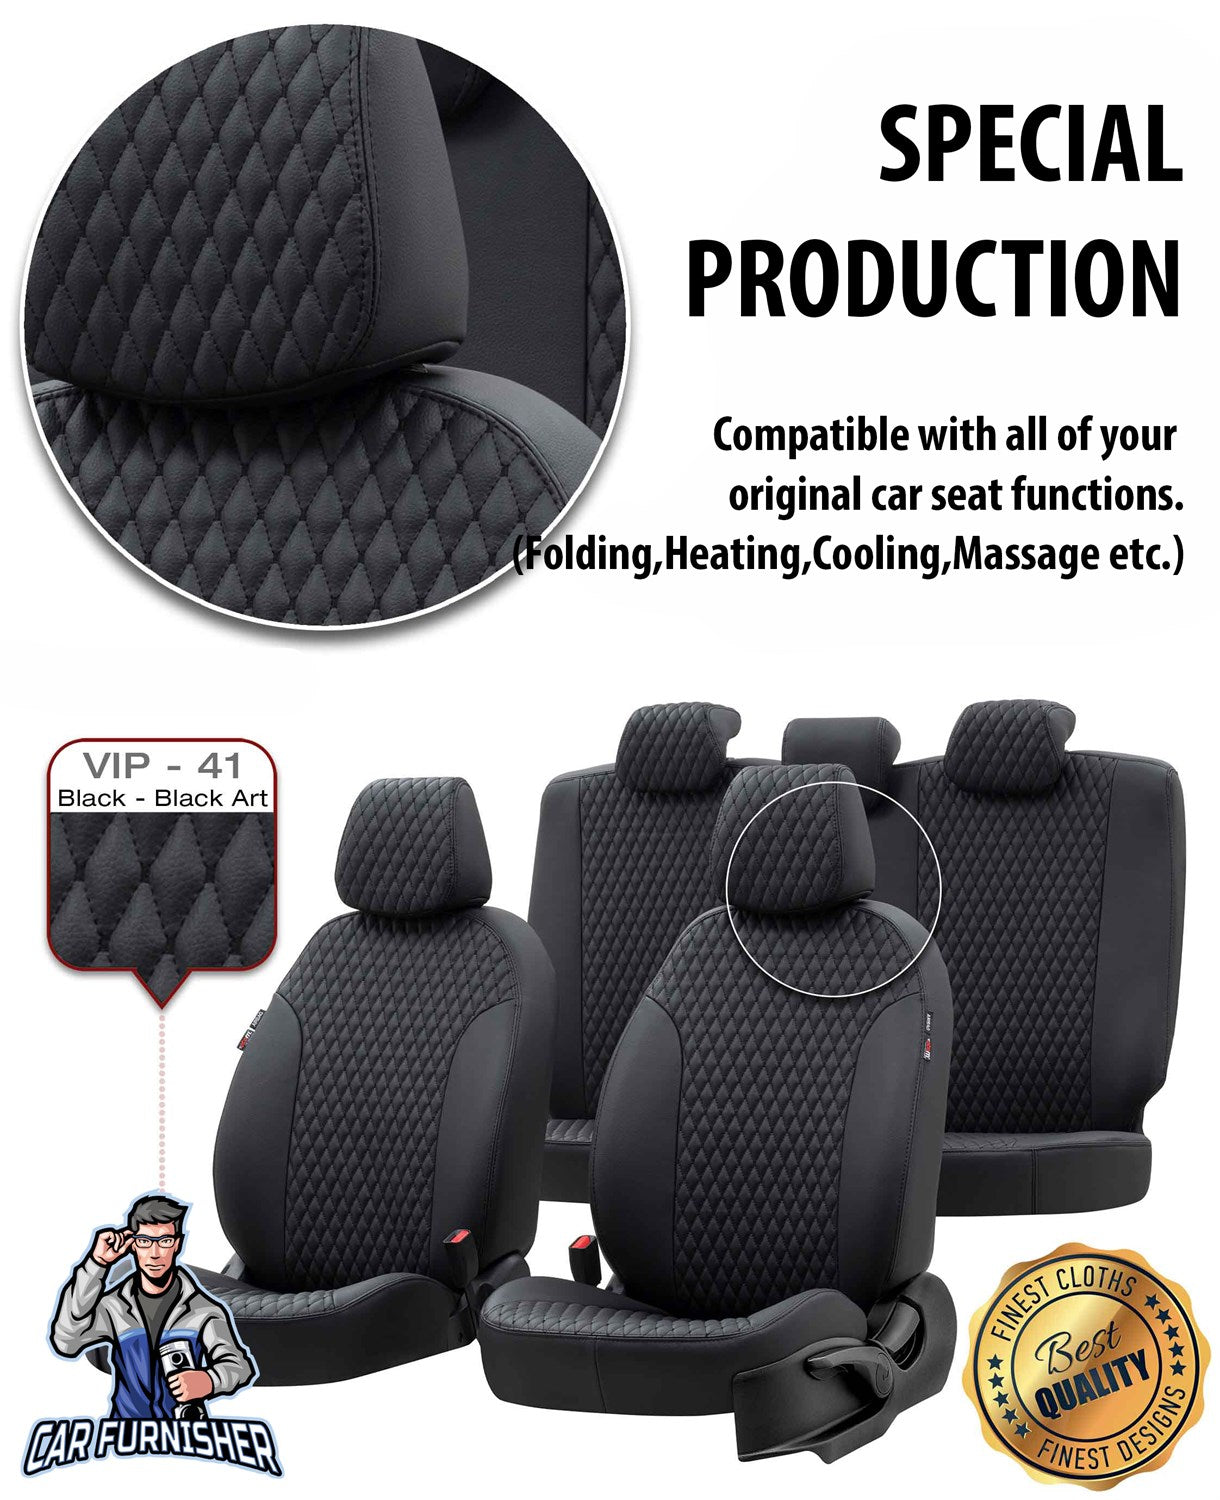 Citroen C1 Seat Covers Amsterdam Leather Design Smoked Black Leather